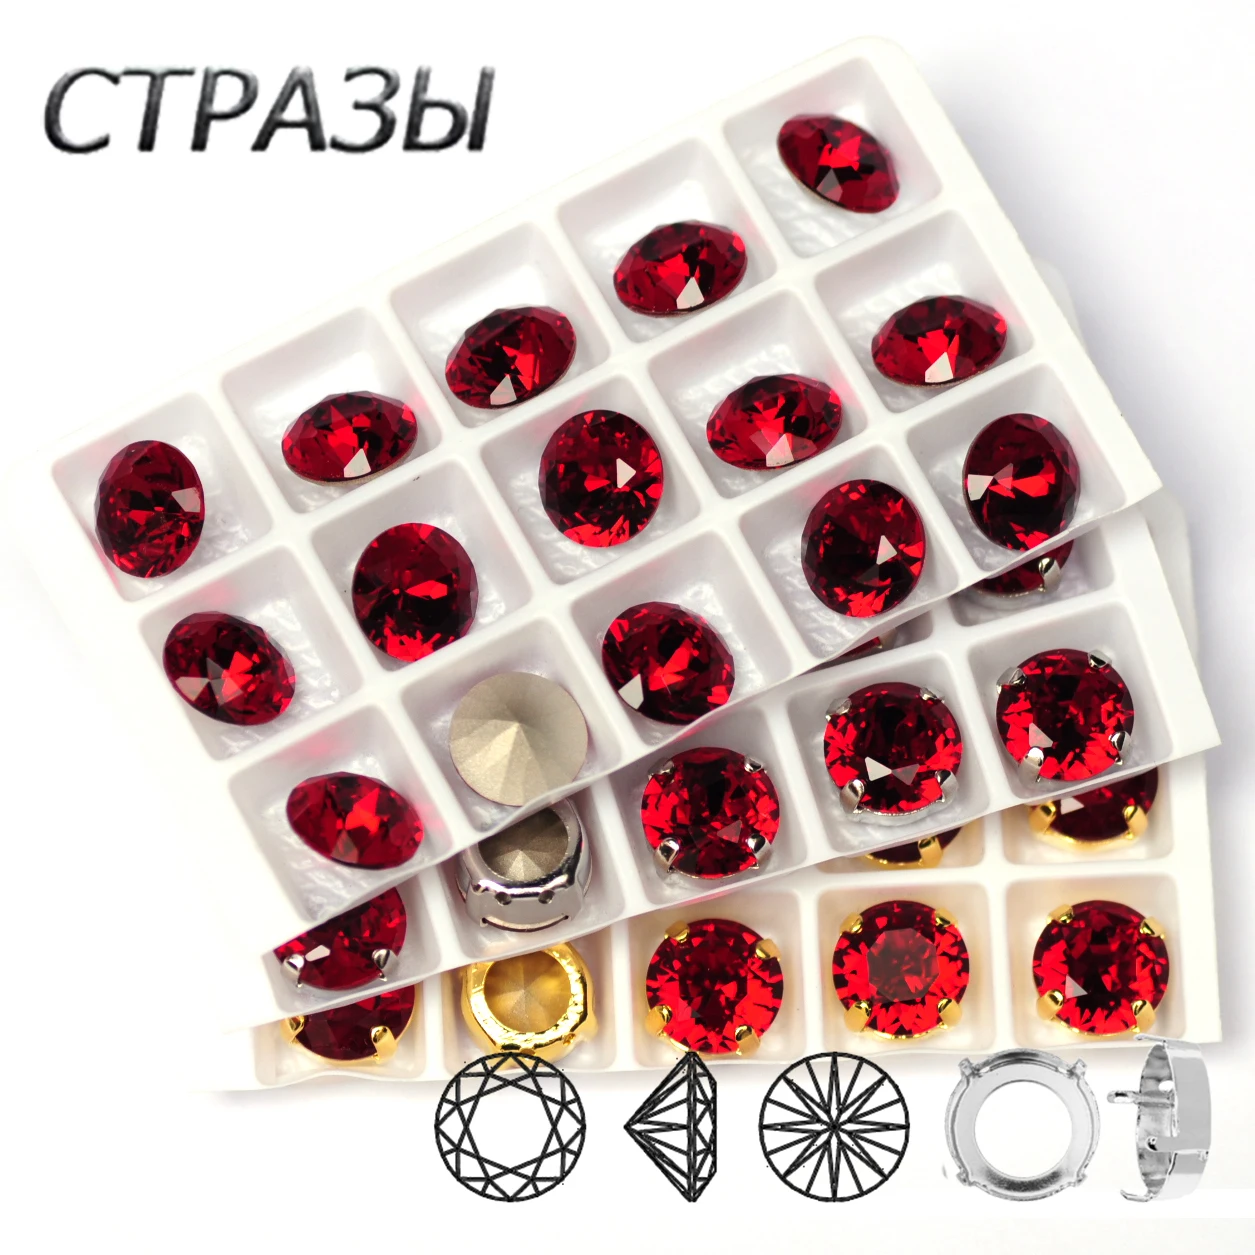 

CTPA3bI 1357 Siam Color Sewing Crystal Pointback Rhinestones Sew On Crystals Stones Brilliant Cut Strass For DIY Clothes Crafts